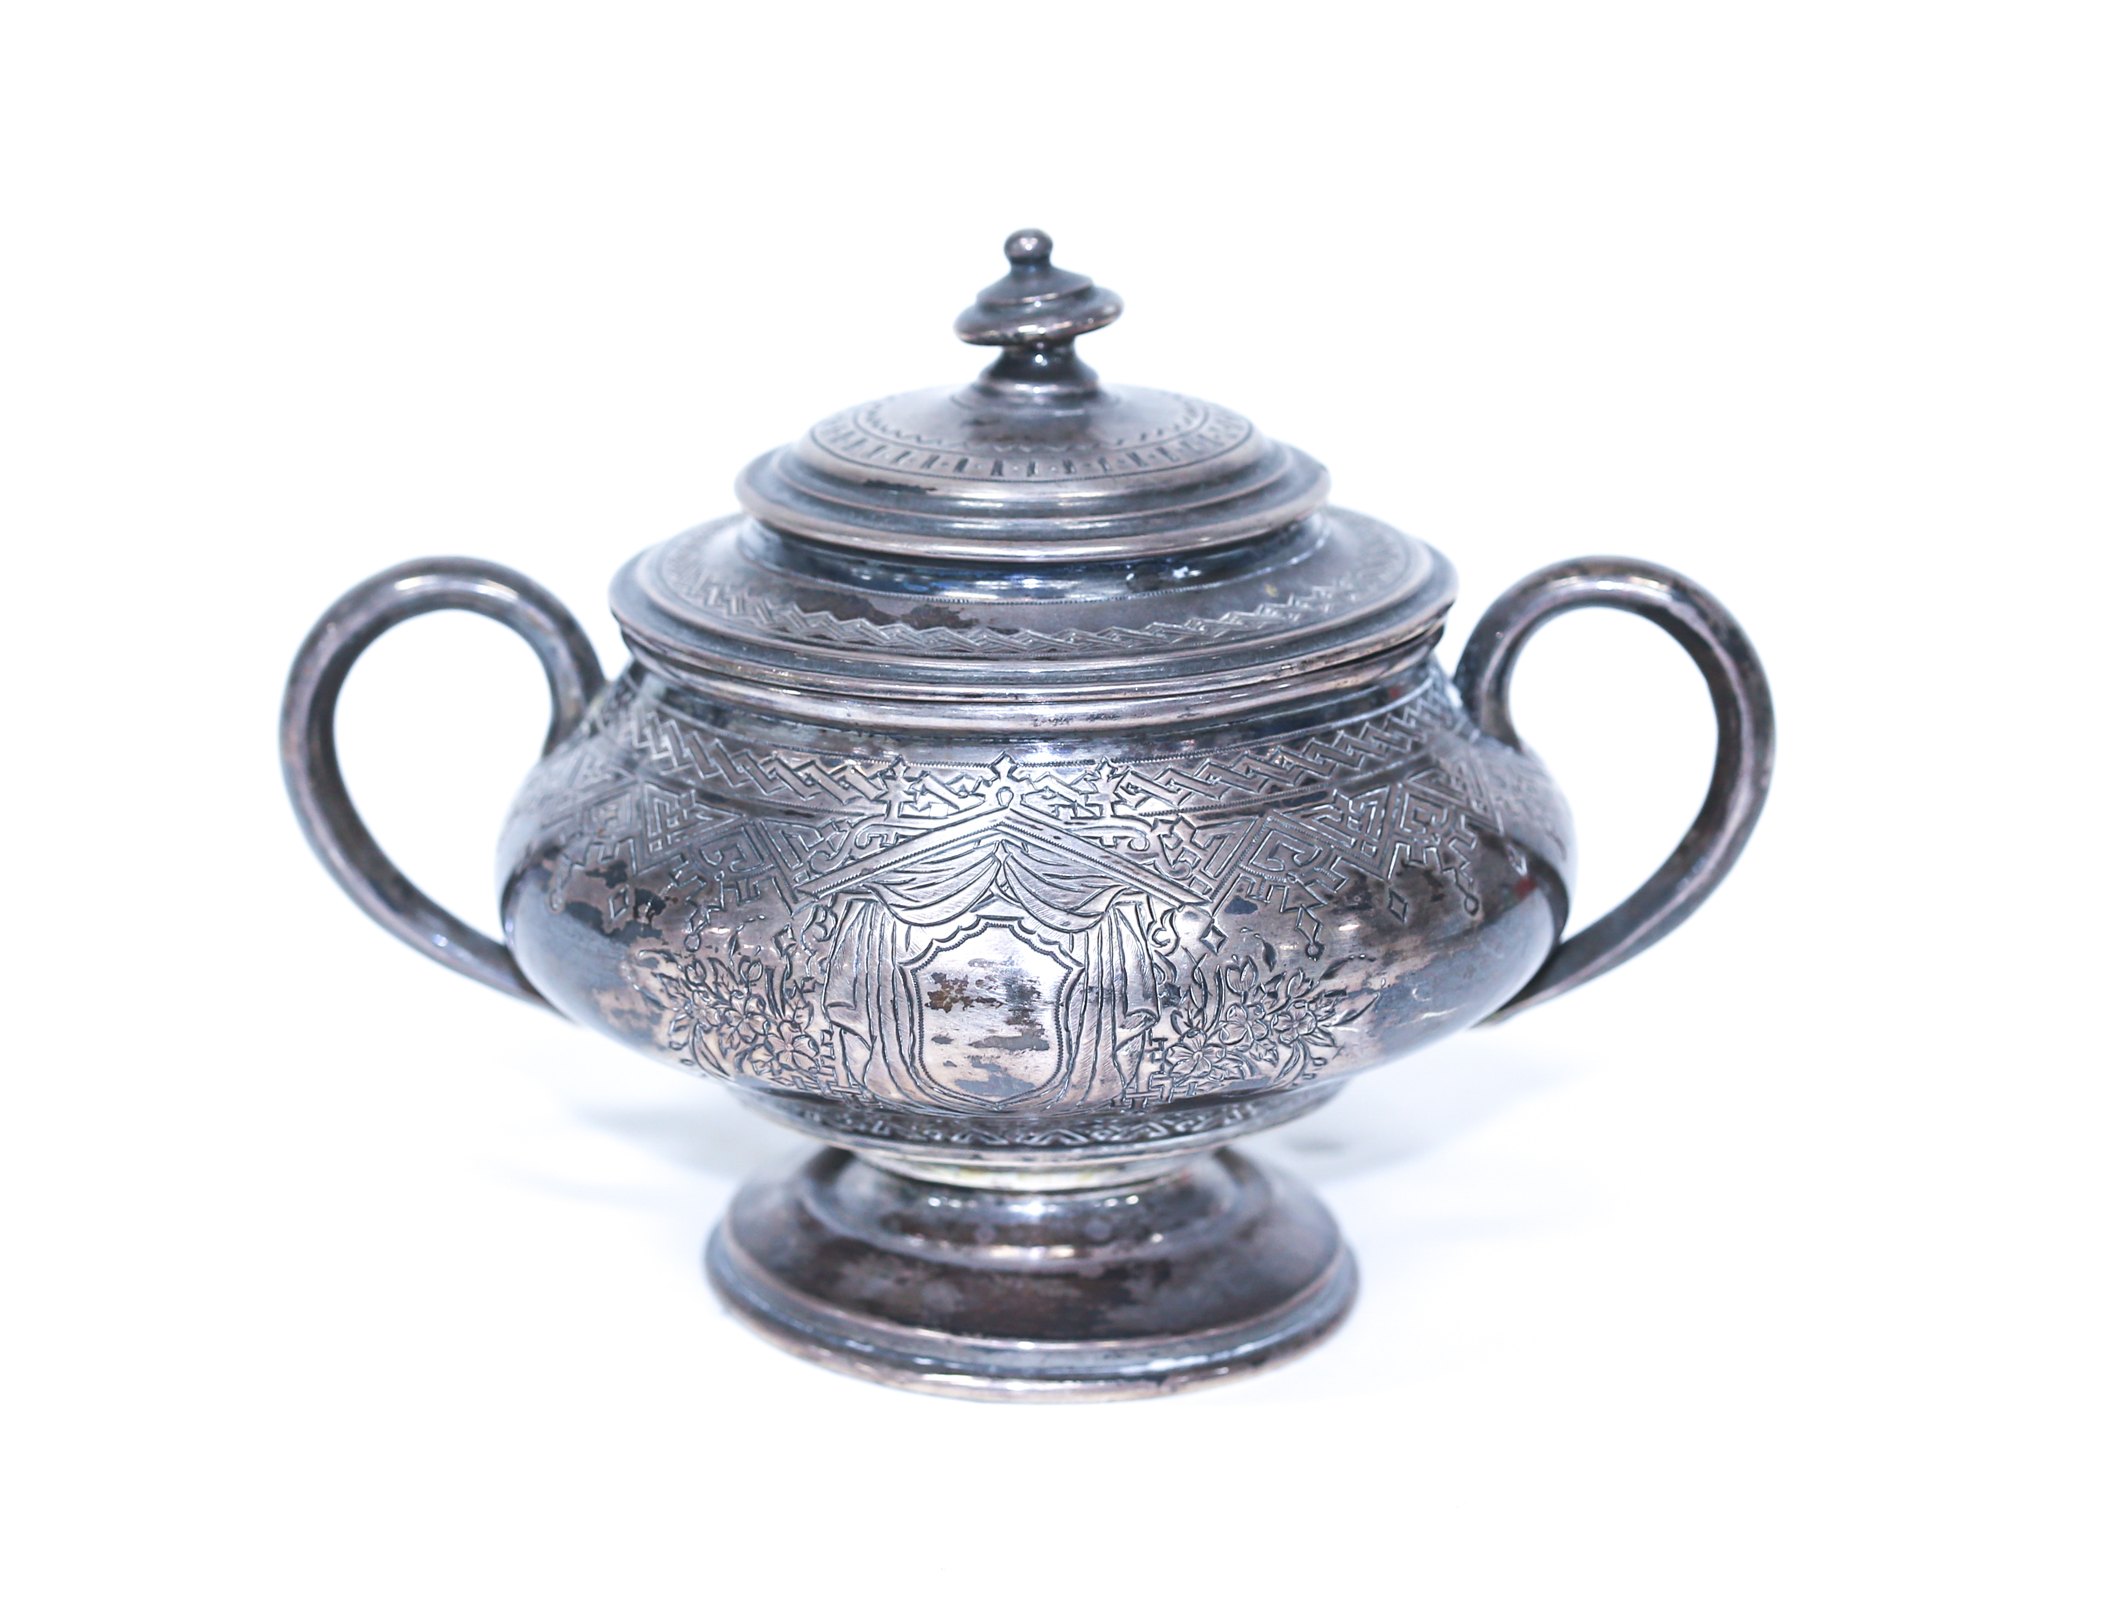 RUSSIAN CHASED SILVER SUGAR BOWL